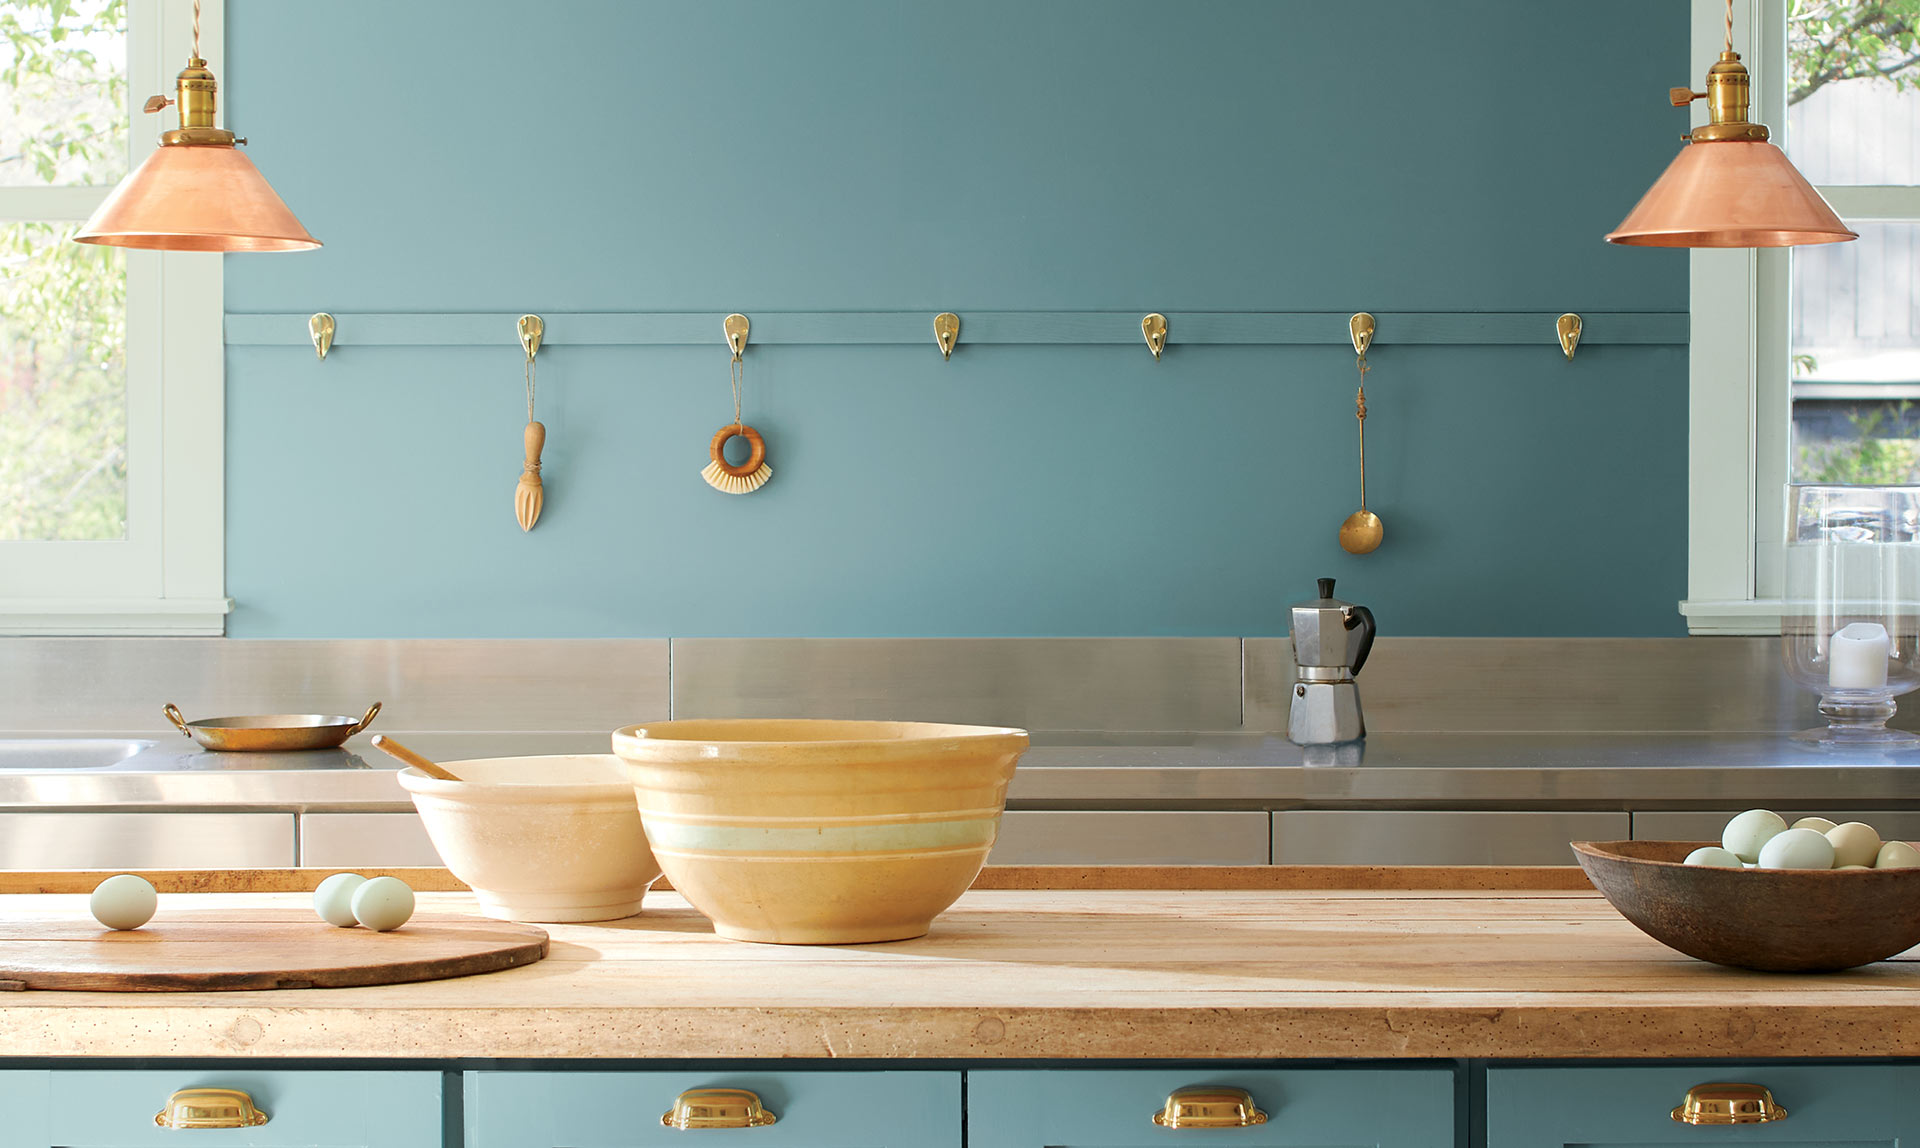 A kitchen with walls and cabinets painted with the Colour of the Year 2021, Aegean Teal 2136-40.